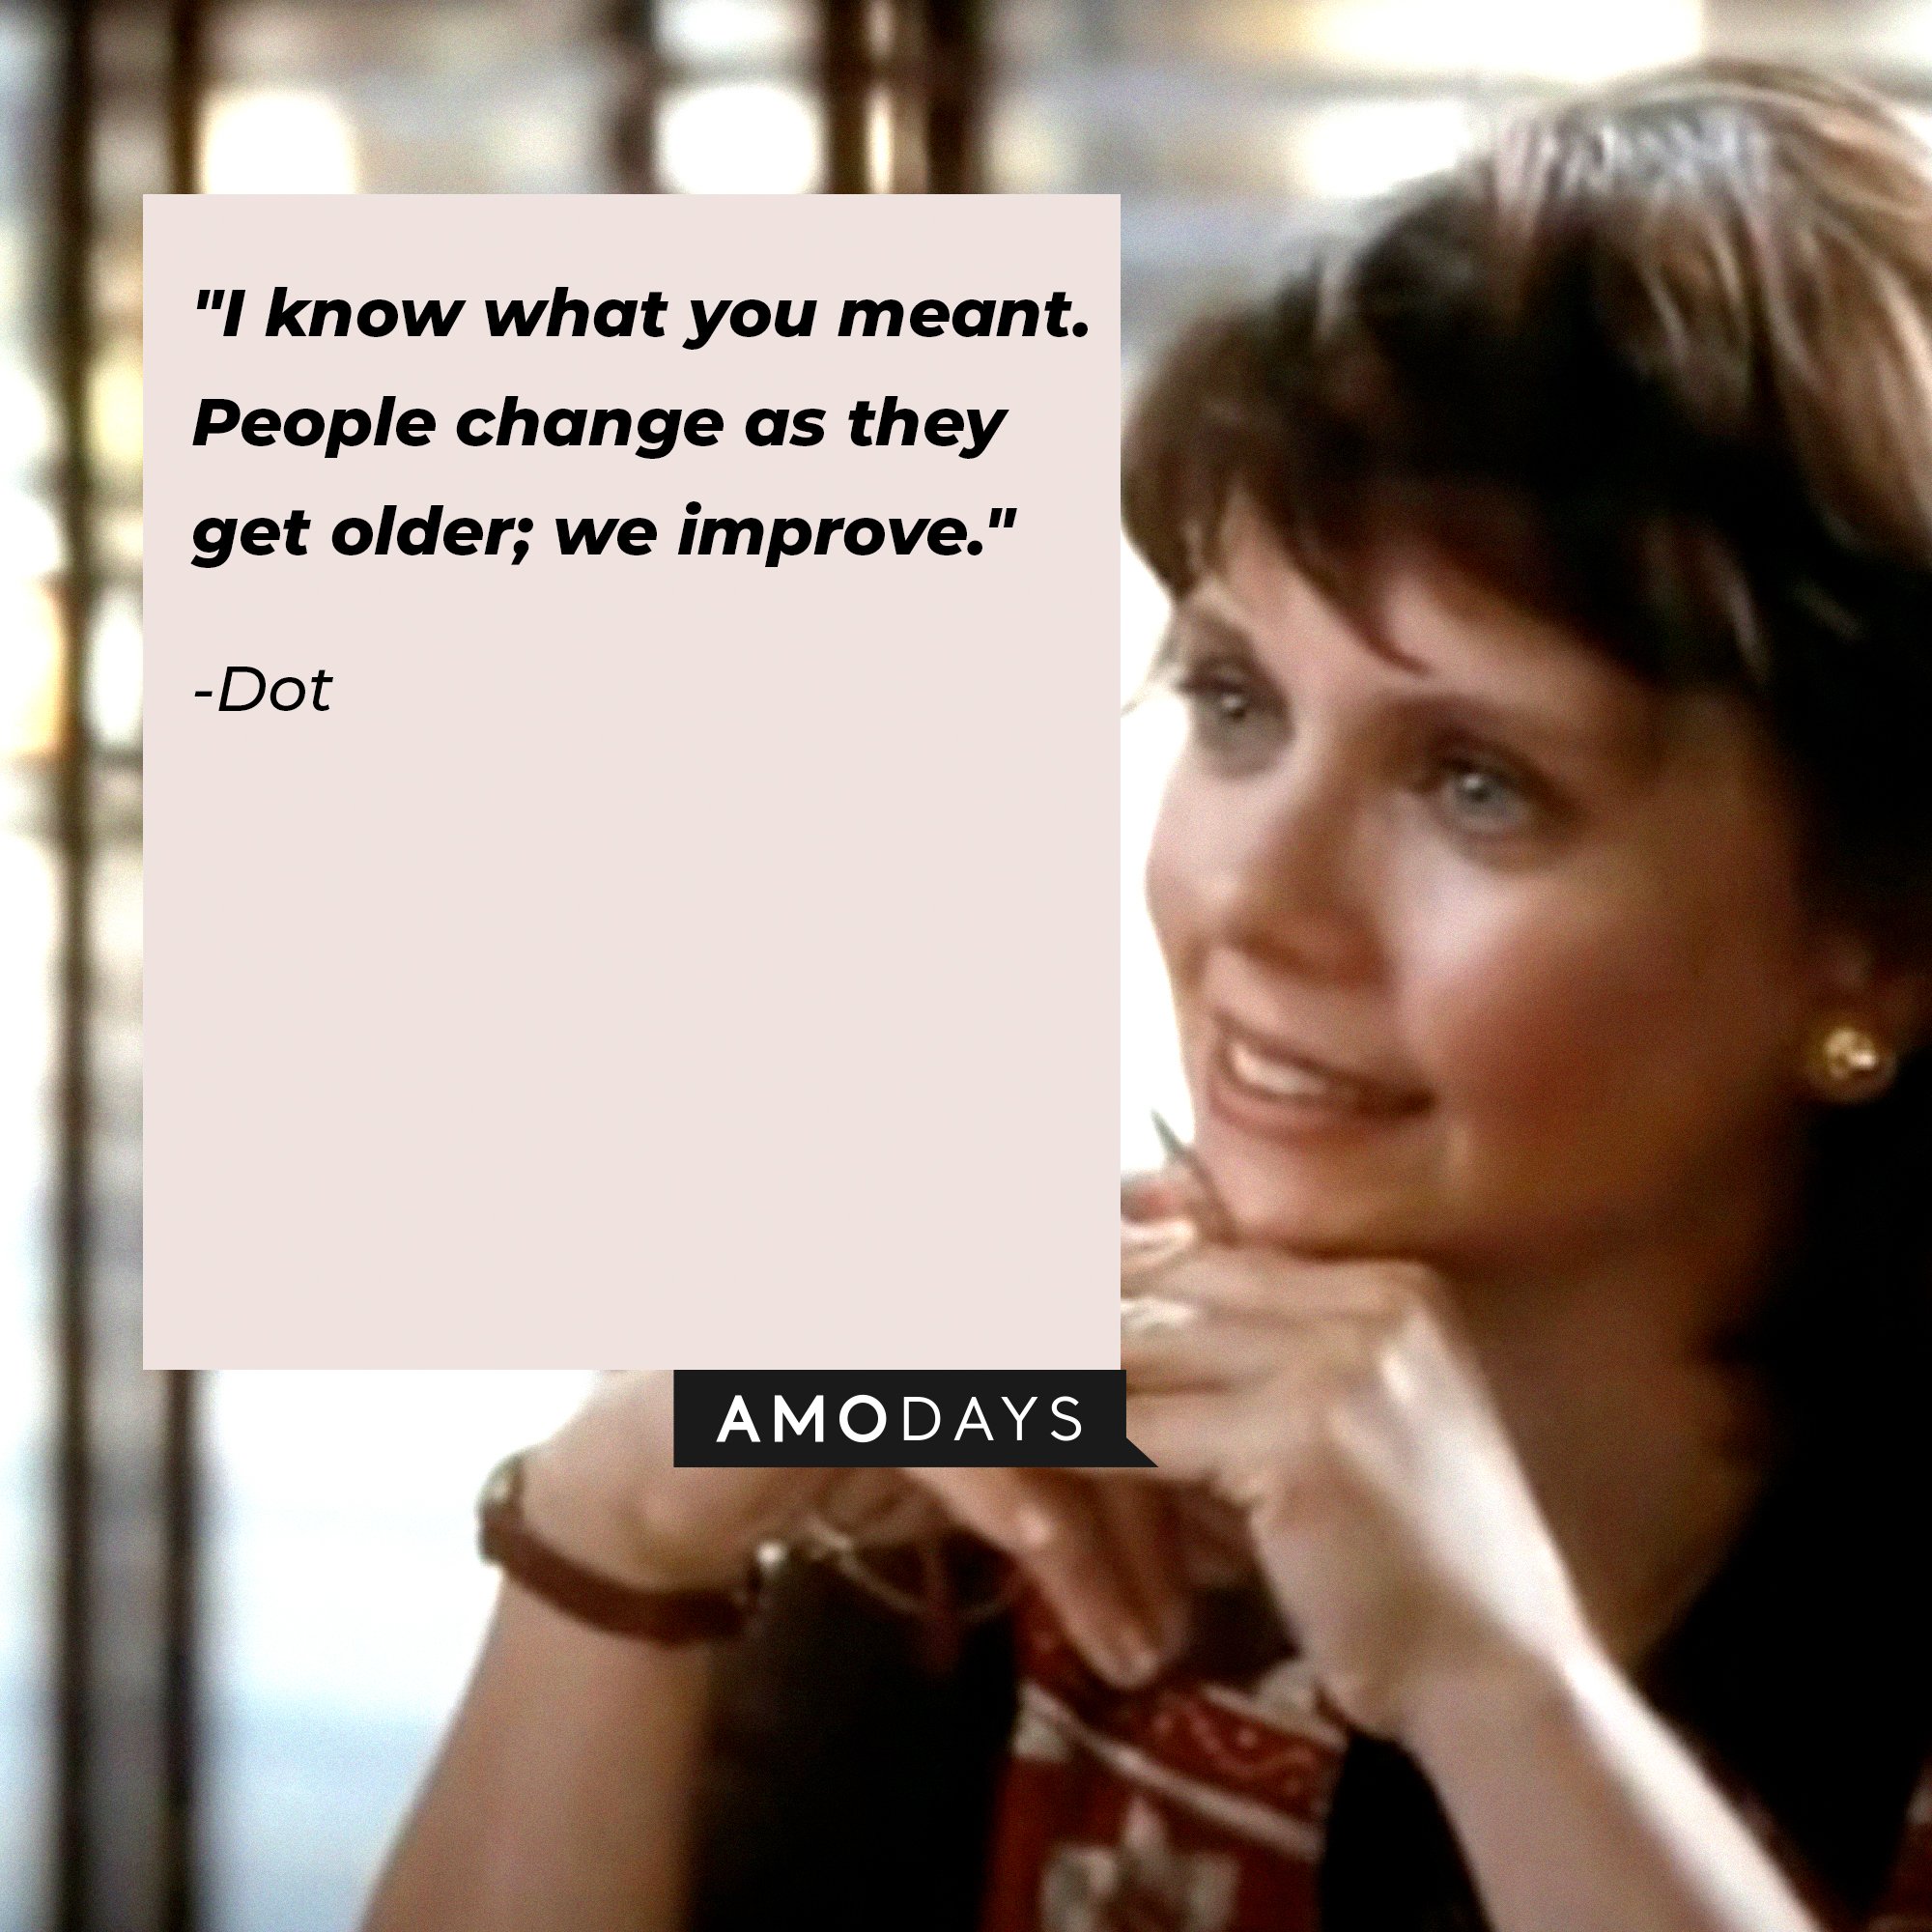 Dot’s quote: "I know what you meant. People change as they get older; we improve."  |  Image: AmoDays